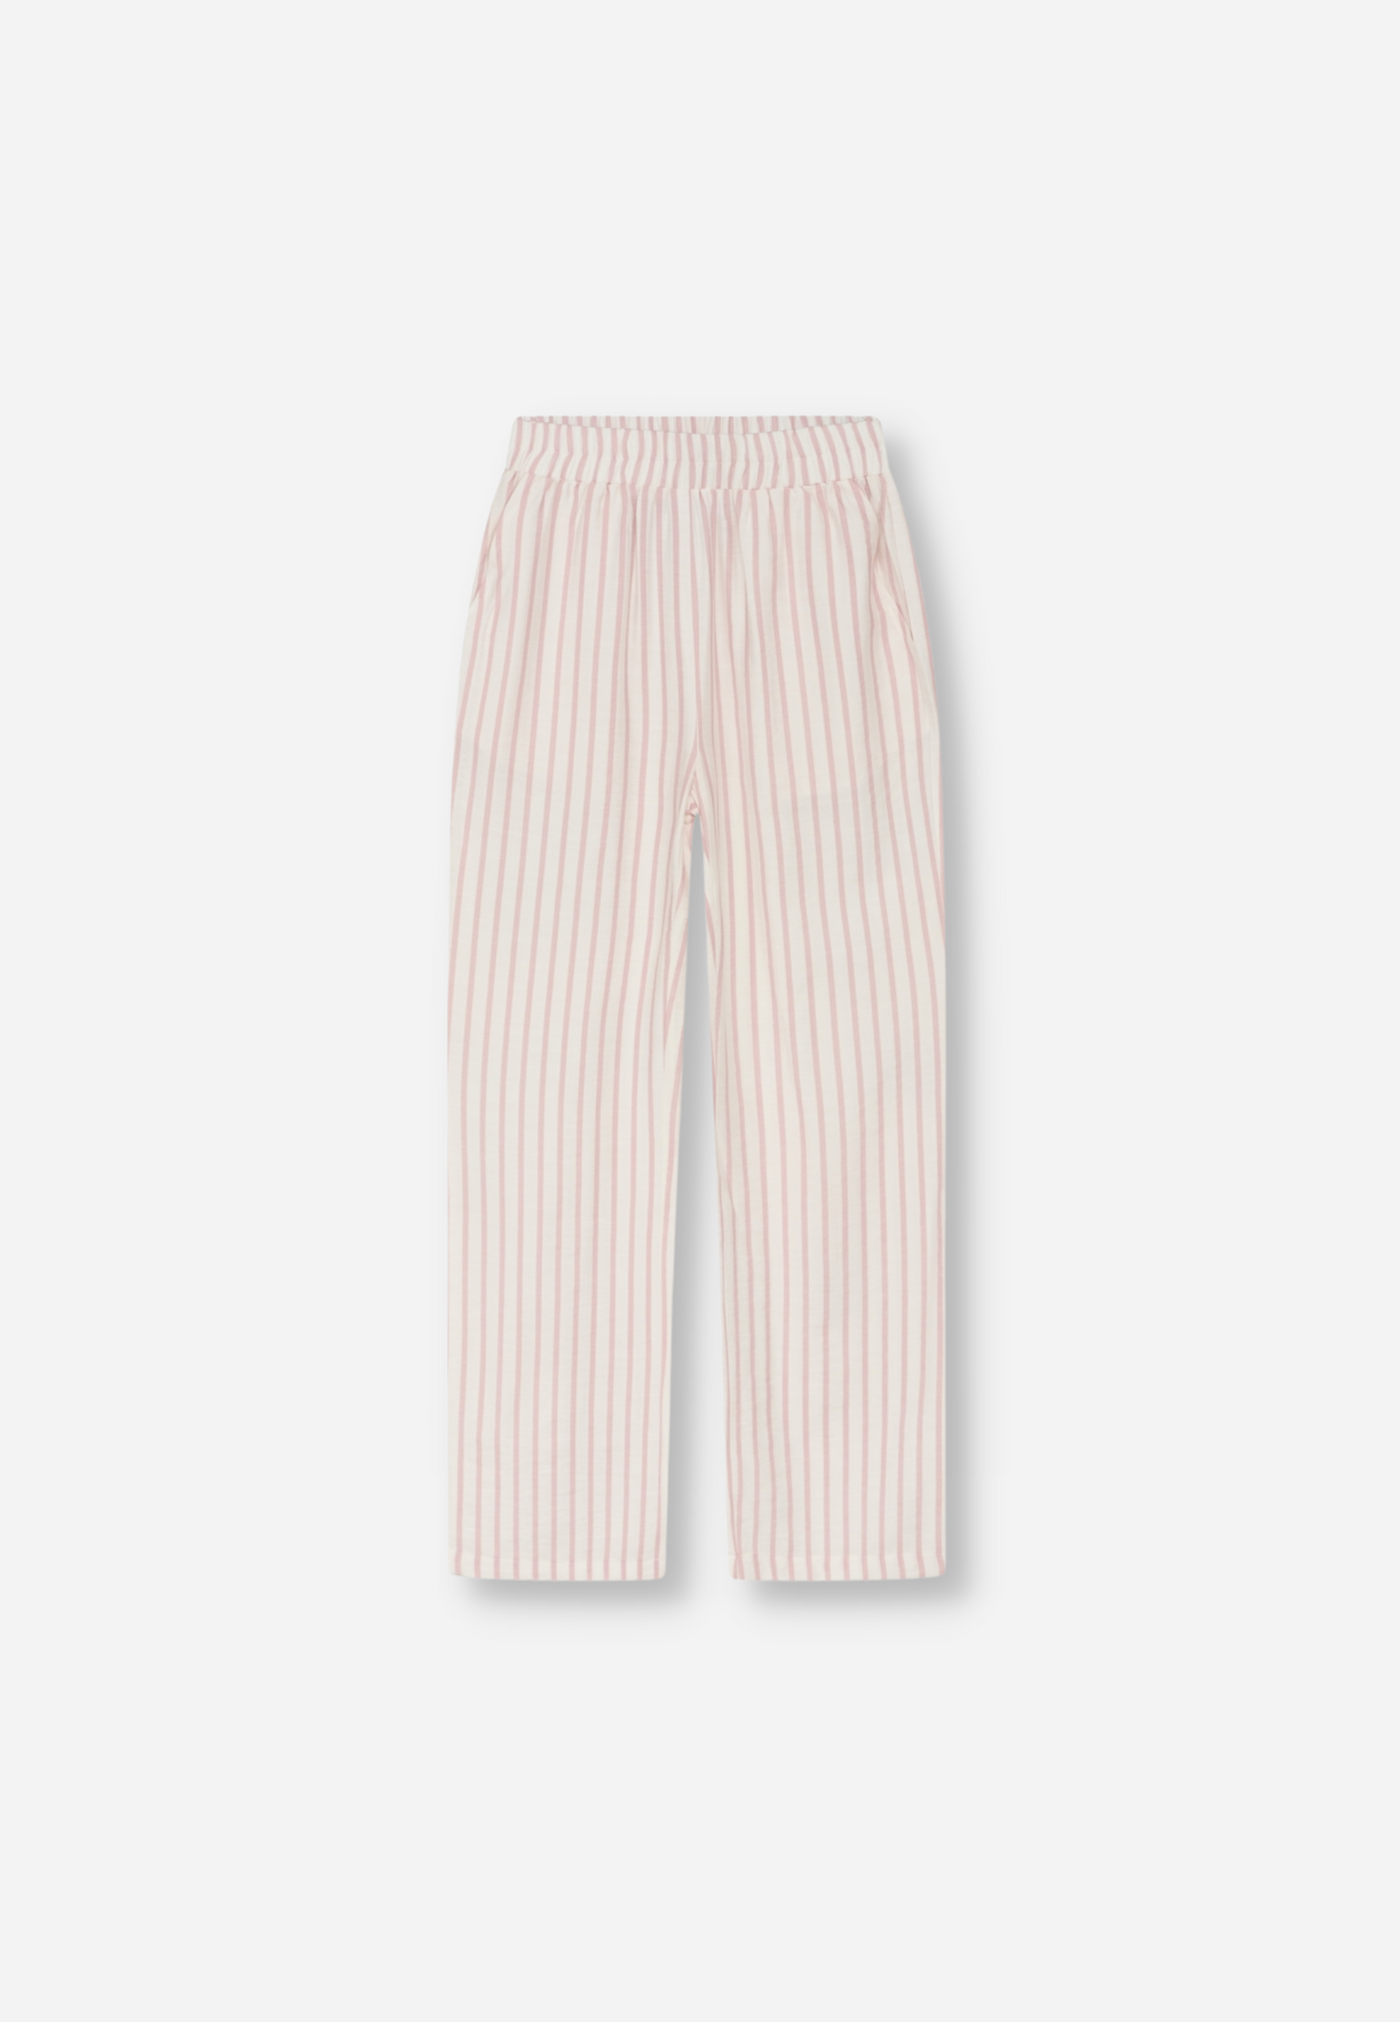 EVELYN STRIPED PANT - PINK